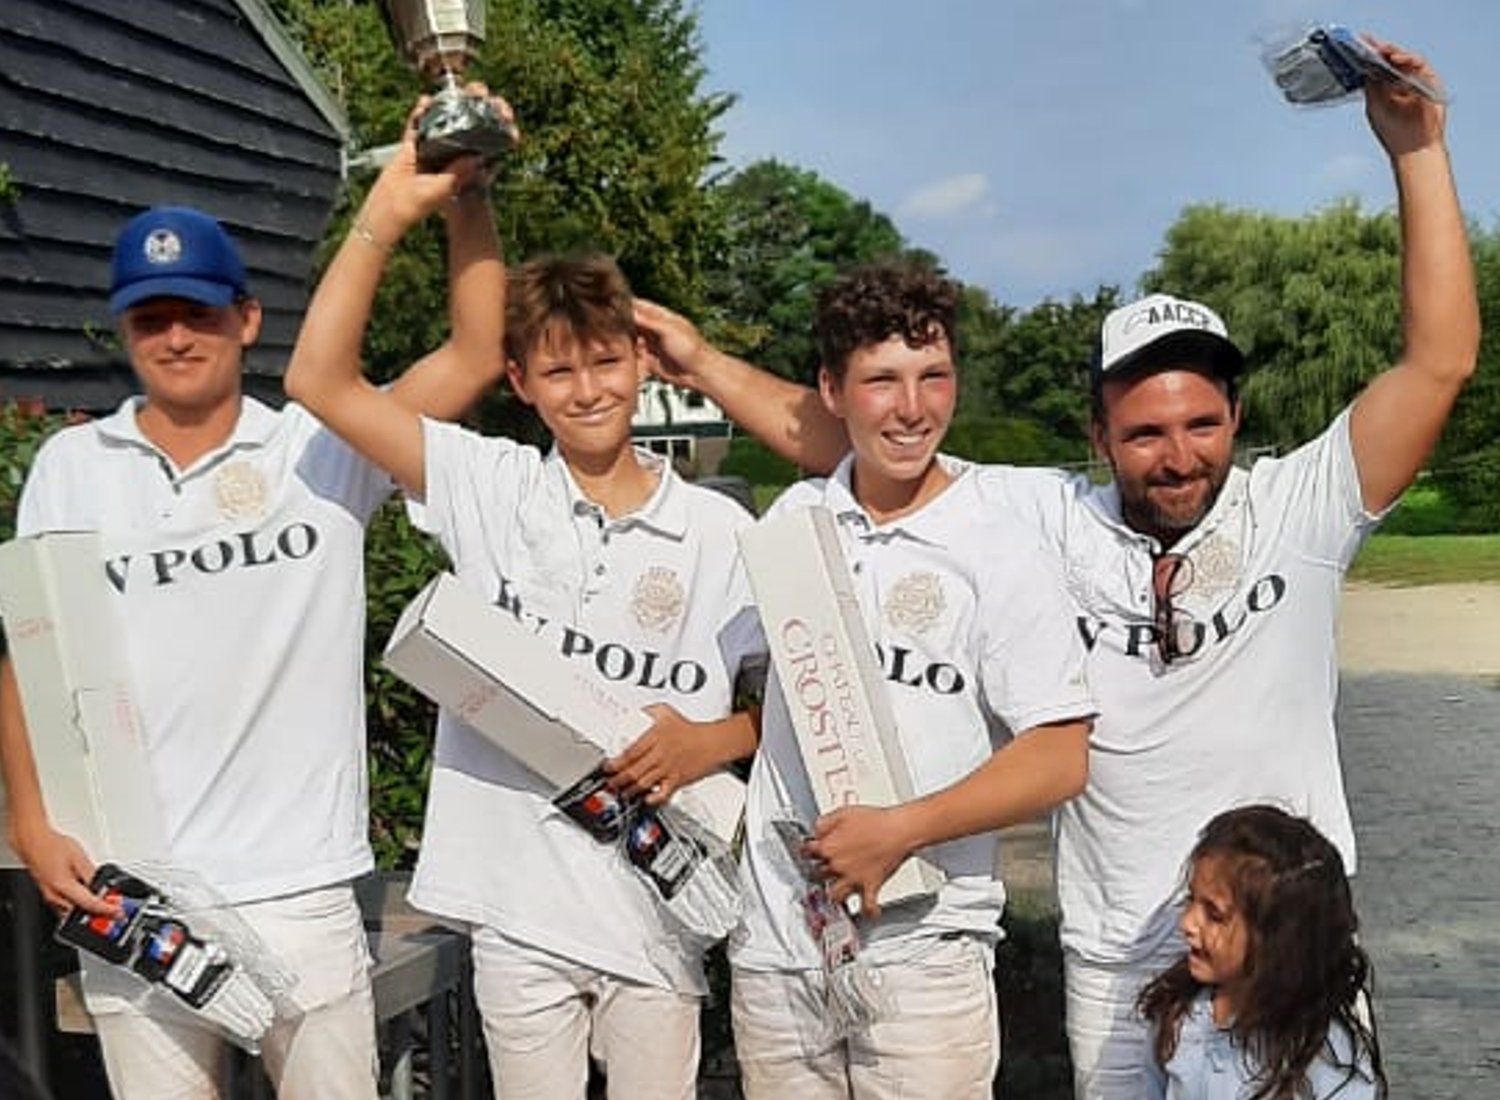 HV POLO wins the END OF THE SUMMER POLO CUP 2021 !